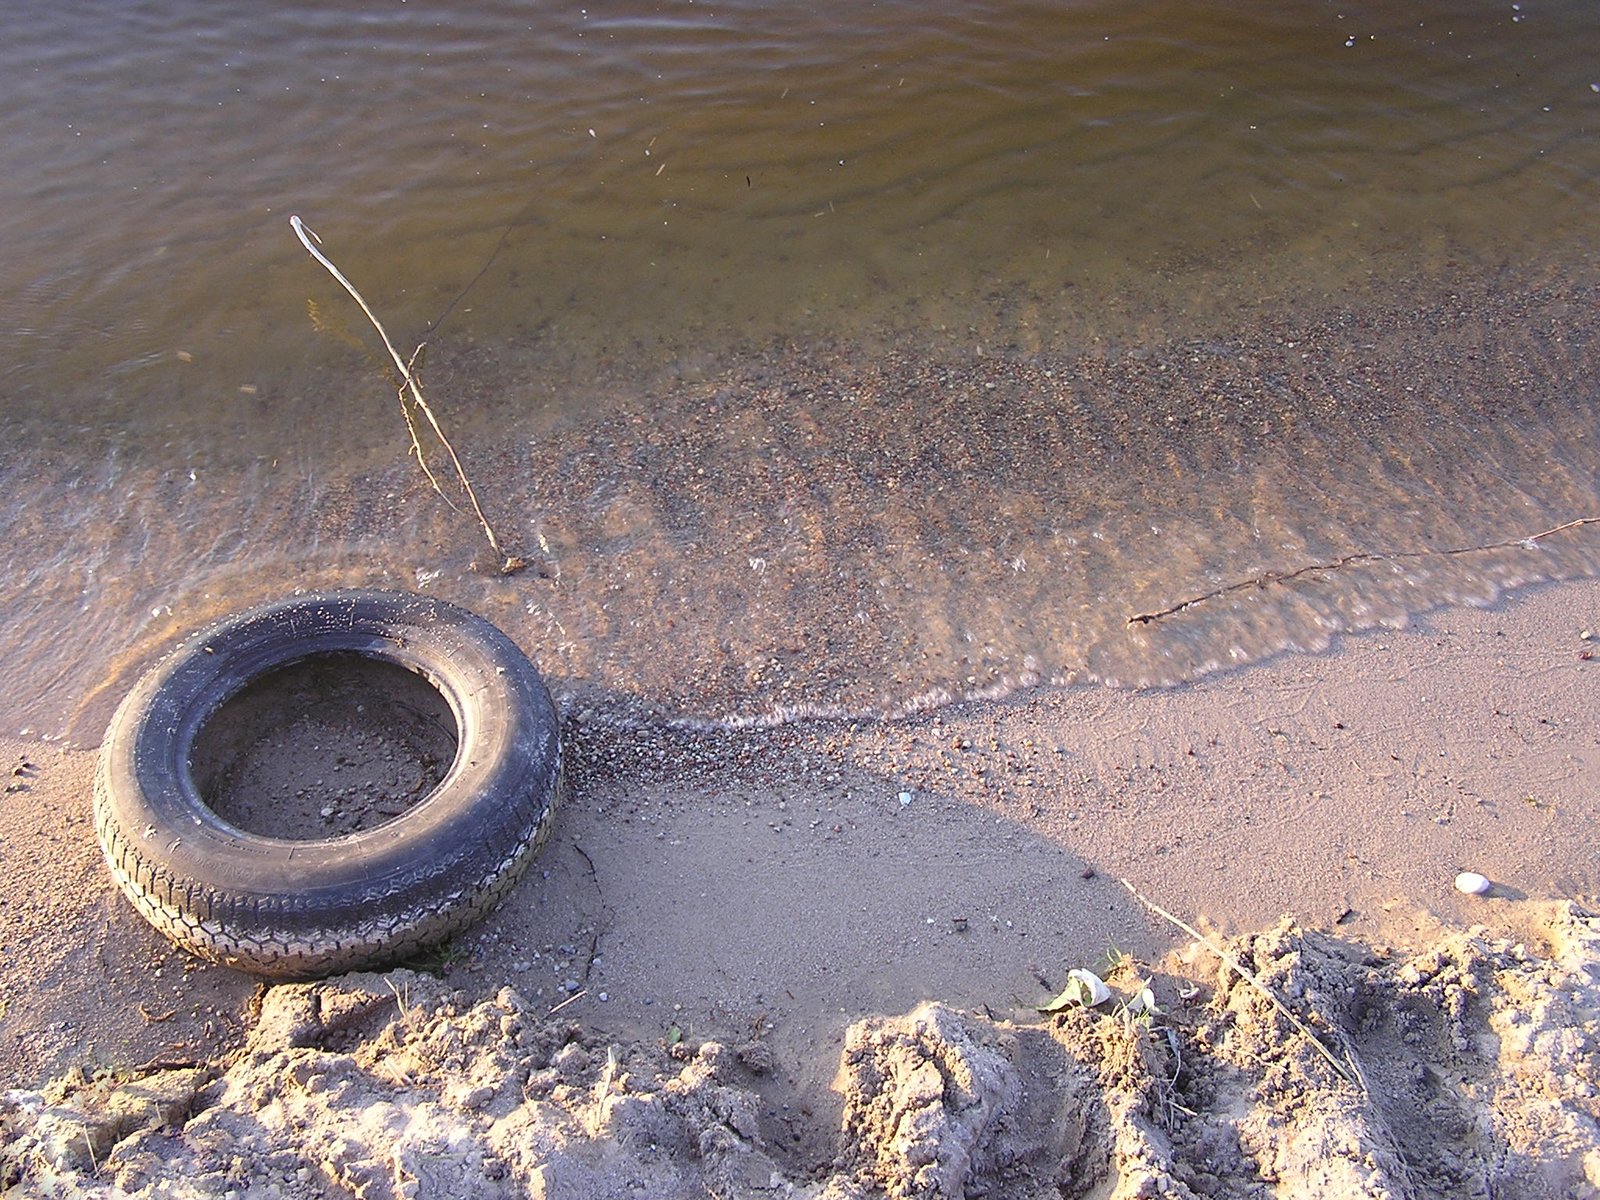 there is a tire on the sand near the water